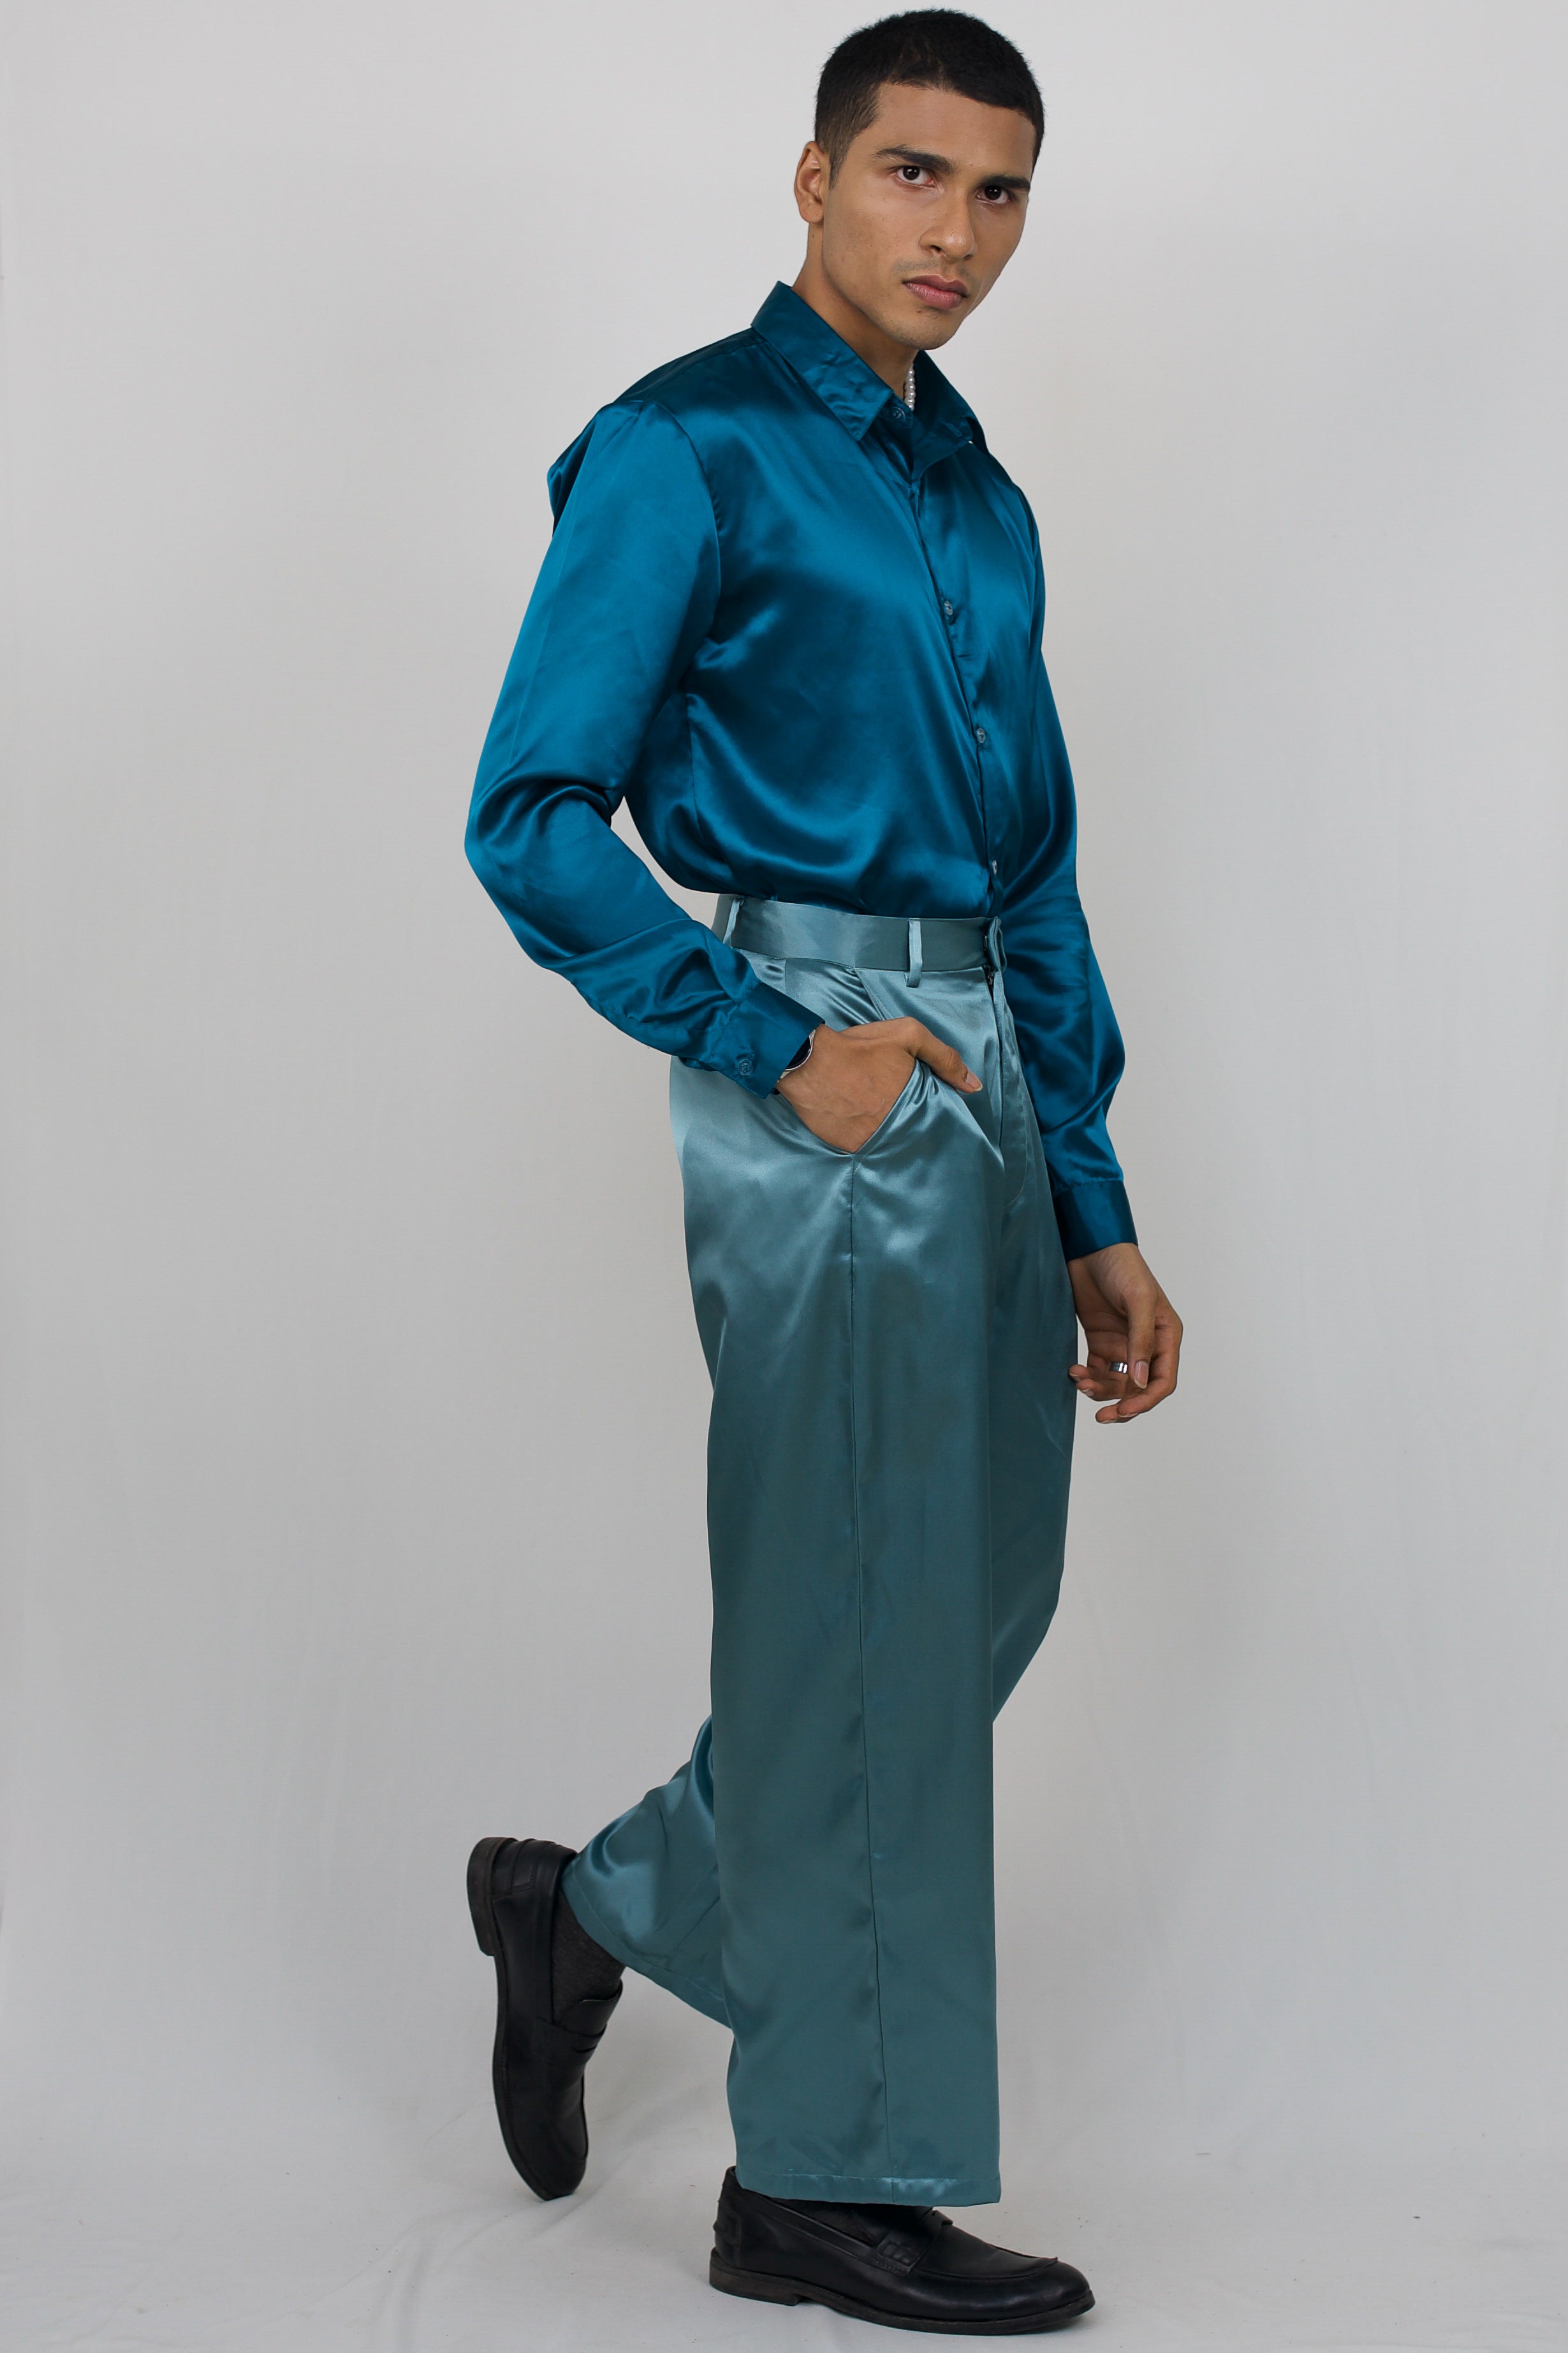 Satin Trousers  Buy Satin Trousers Online at Best Prices In India   Flipkartcom